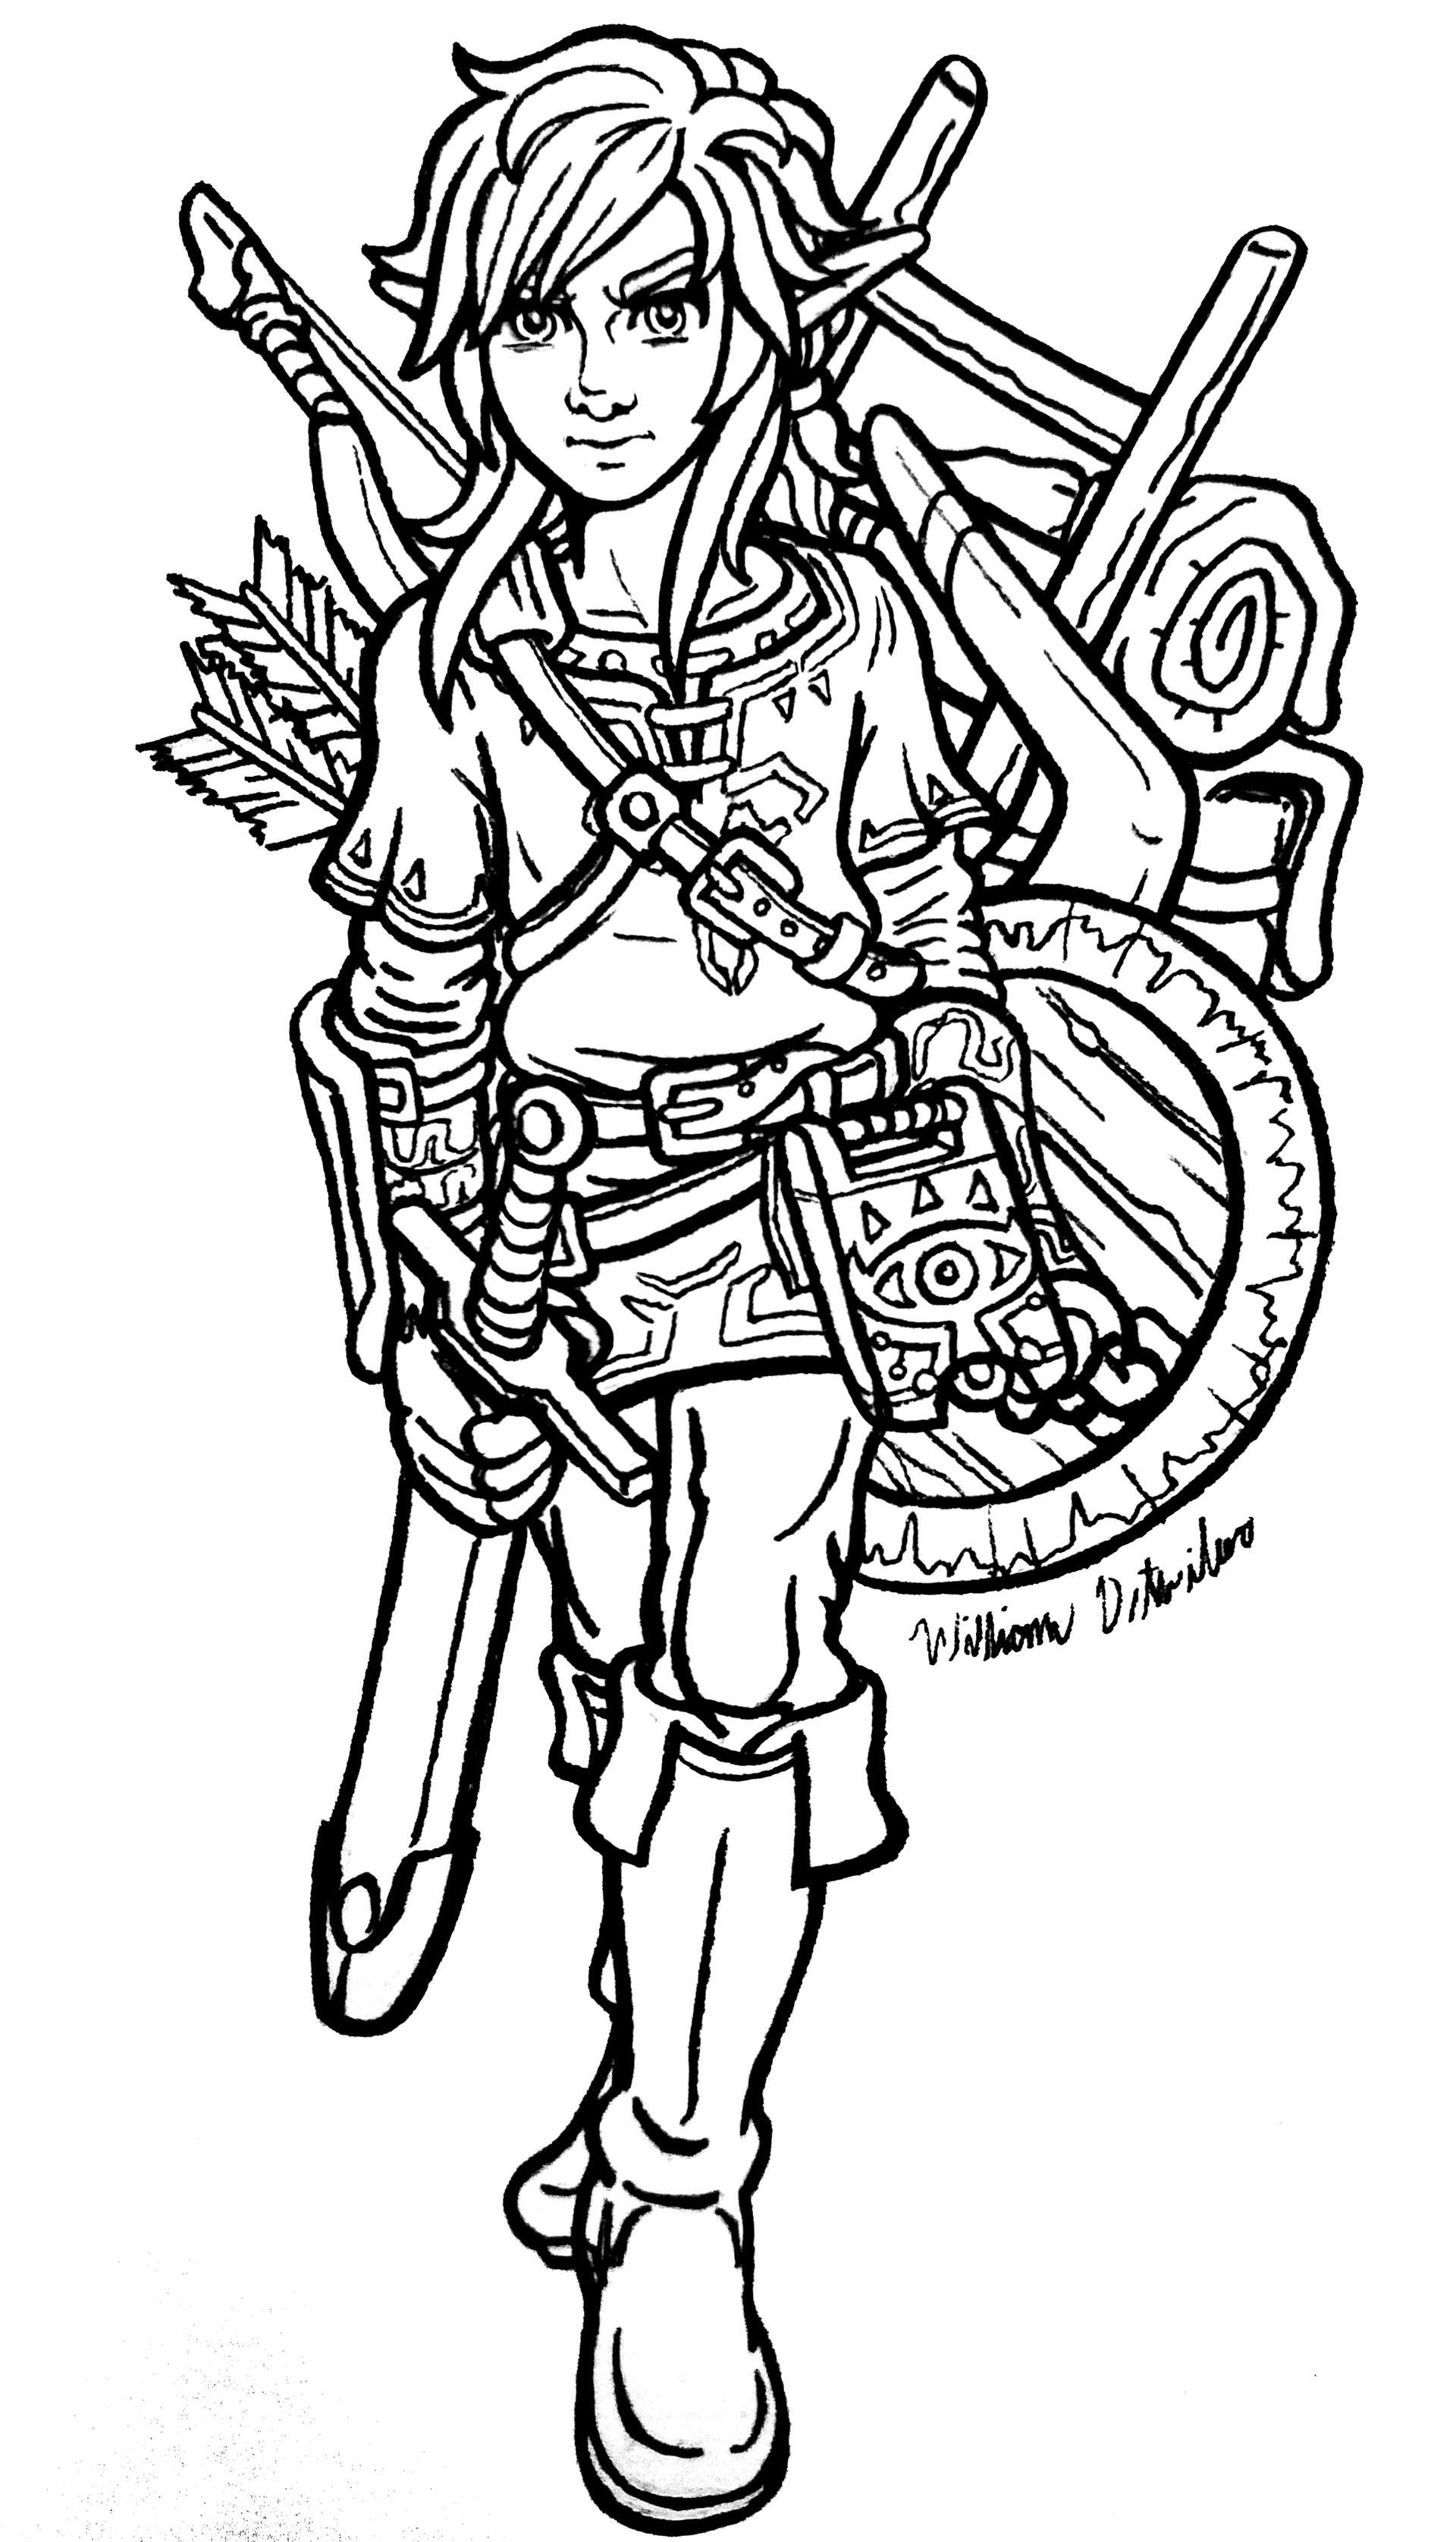 link breath of the wild coloring pages